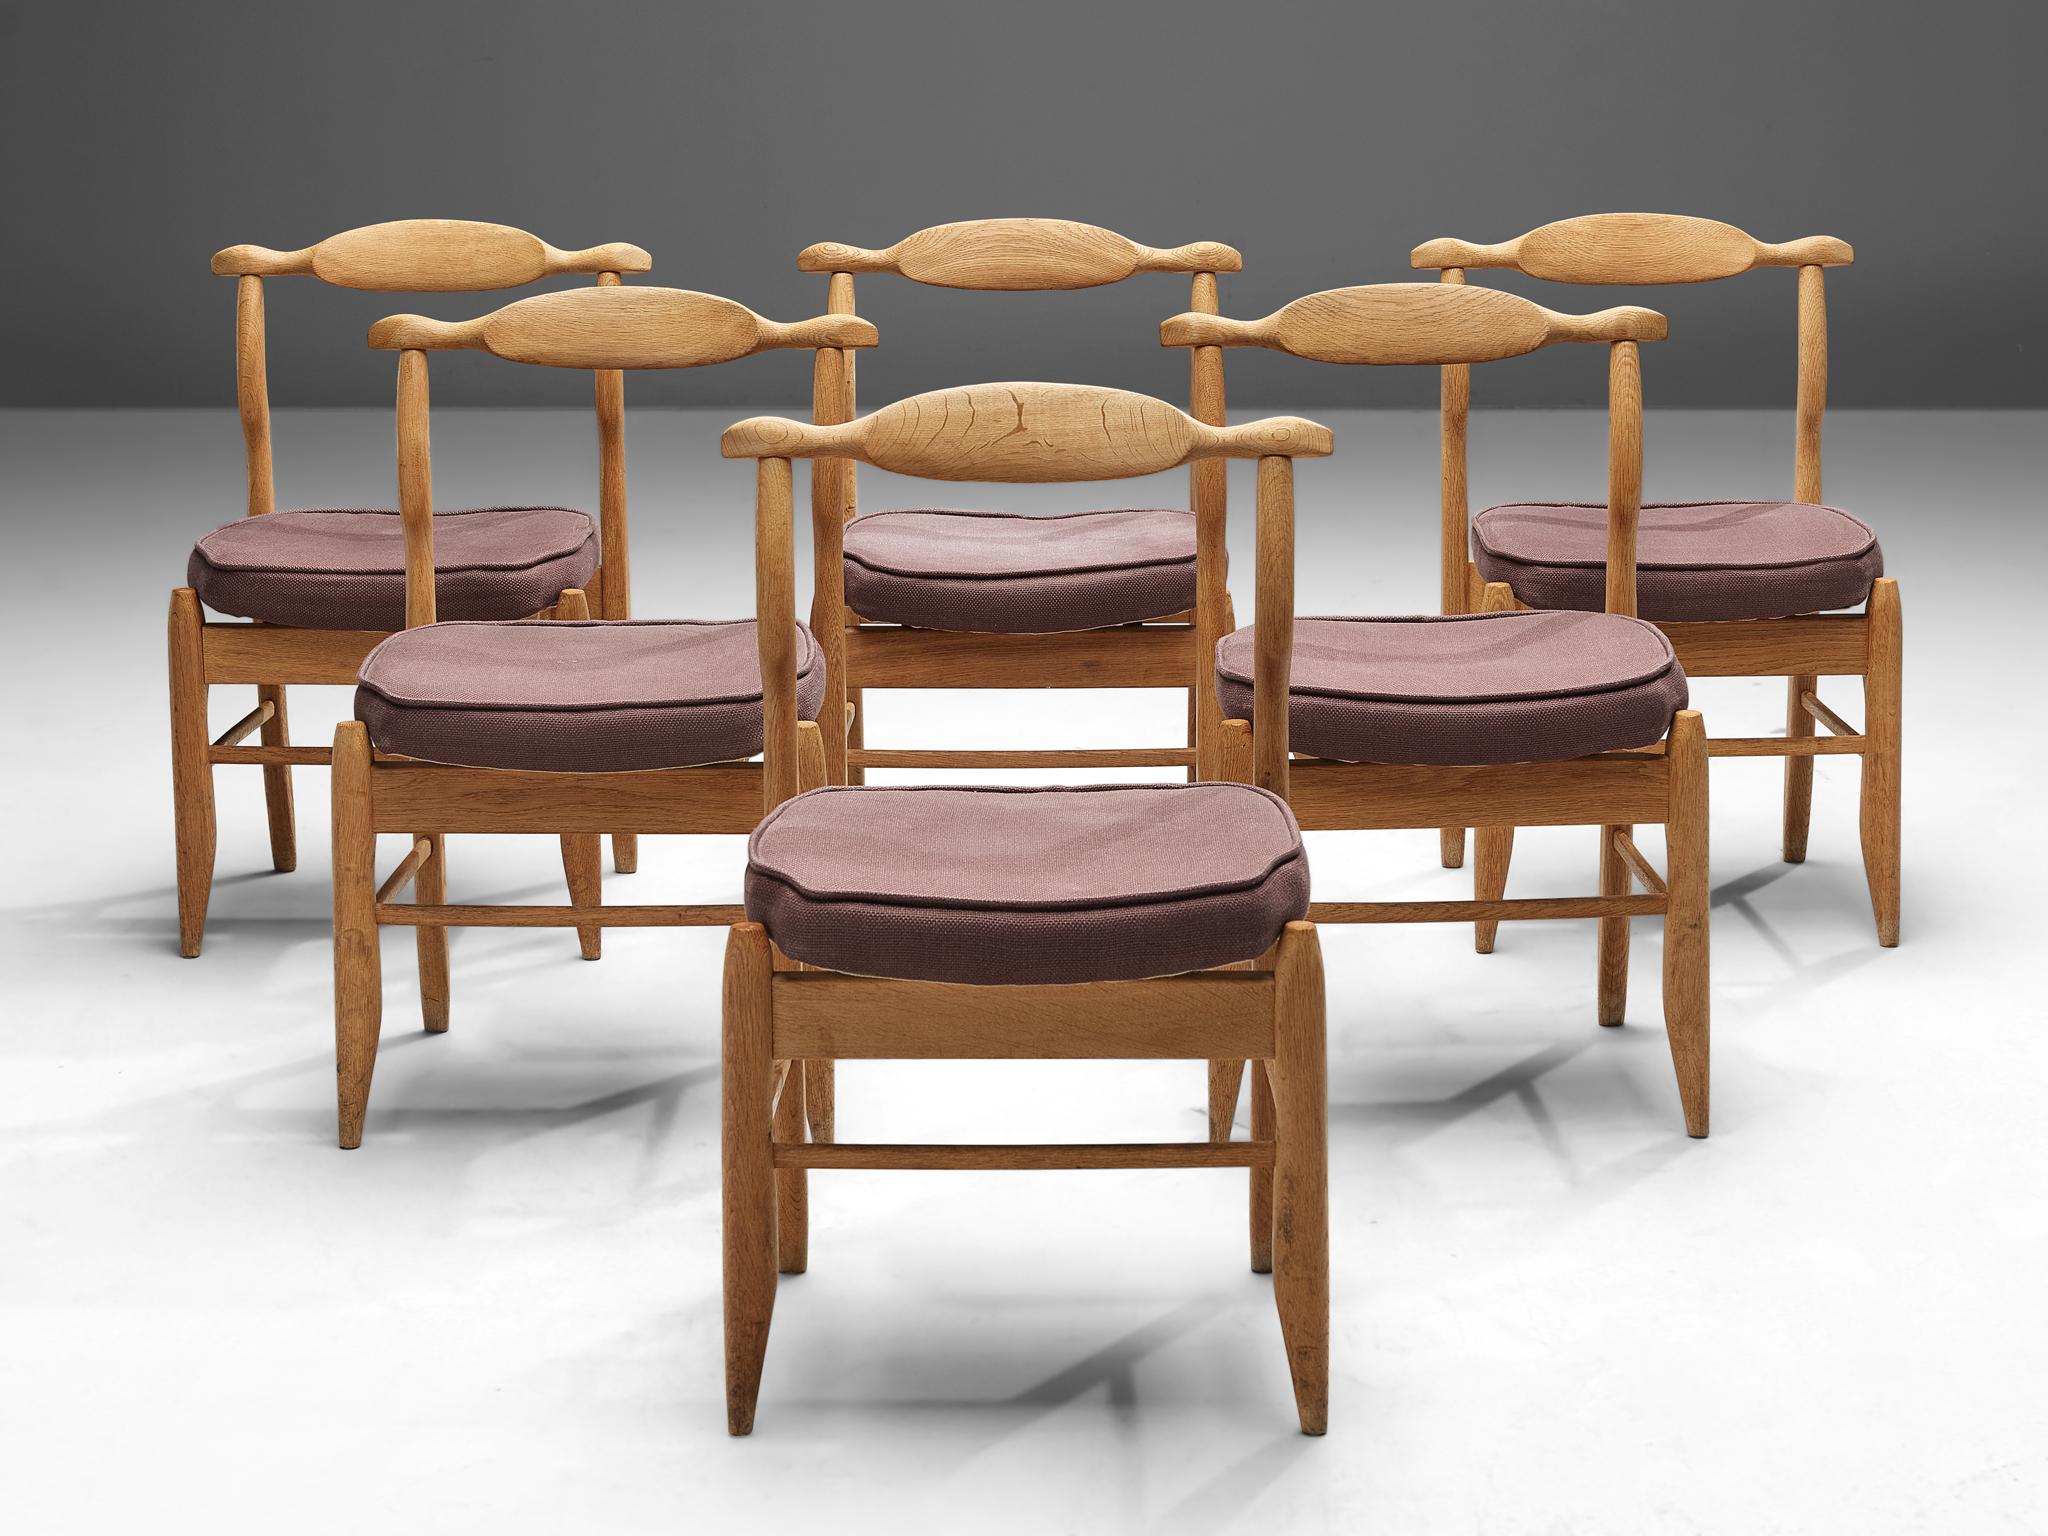 Guillerme & Chambron, set of six dining chairs model 'Fumay,' oak and fabric, France, 1960s.

Beautifully shaped chairs in patinated oak by French designer duo Jacques Chambron and Robert Guillerme. These dining chairs show beautiful lines in